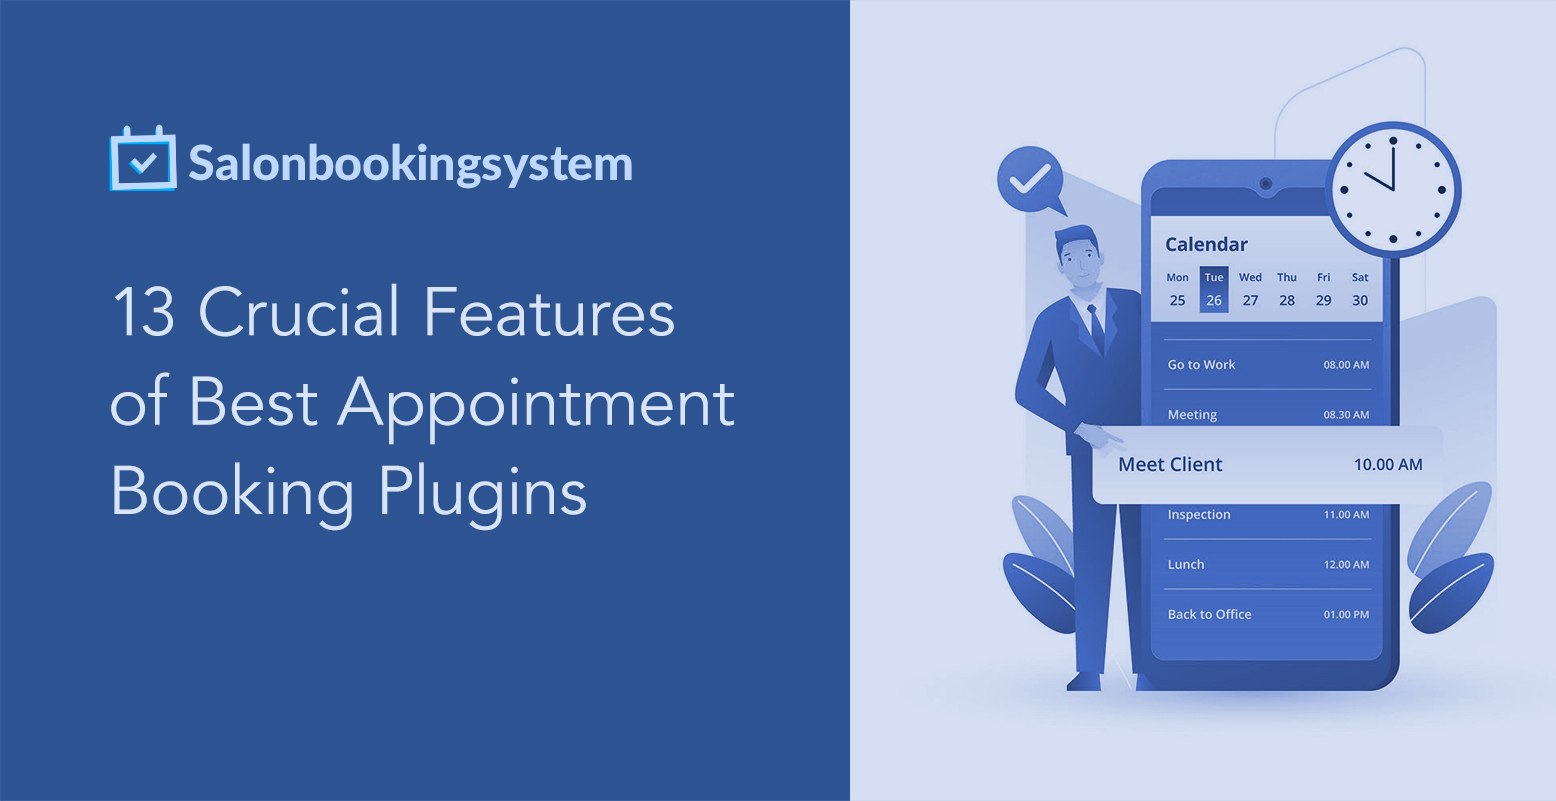 13 Crucial Features of Best Appointment Booking Plugins